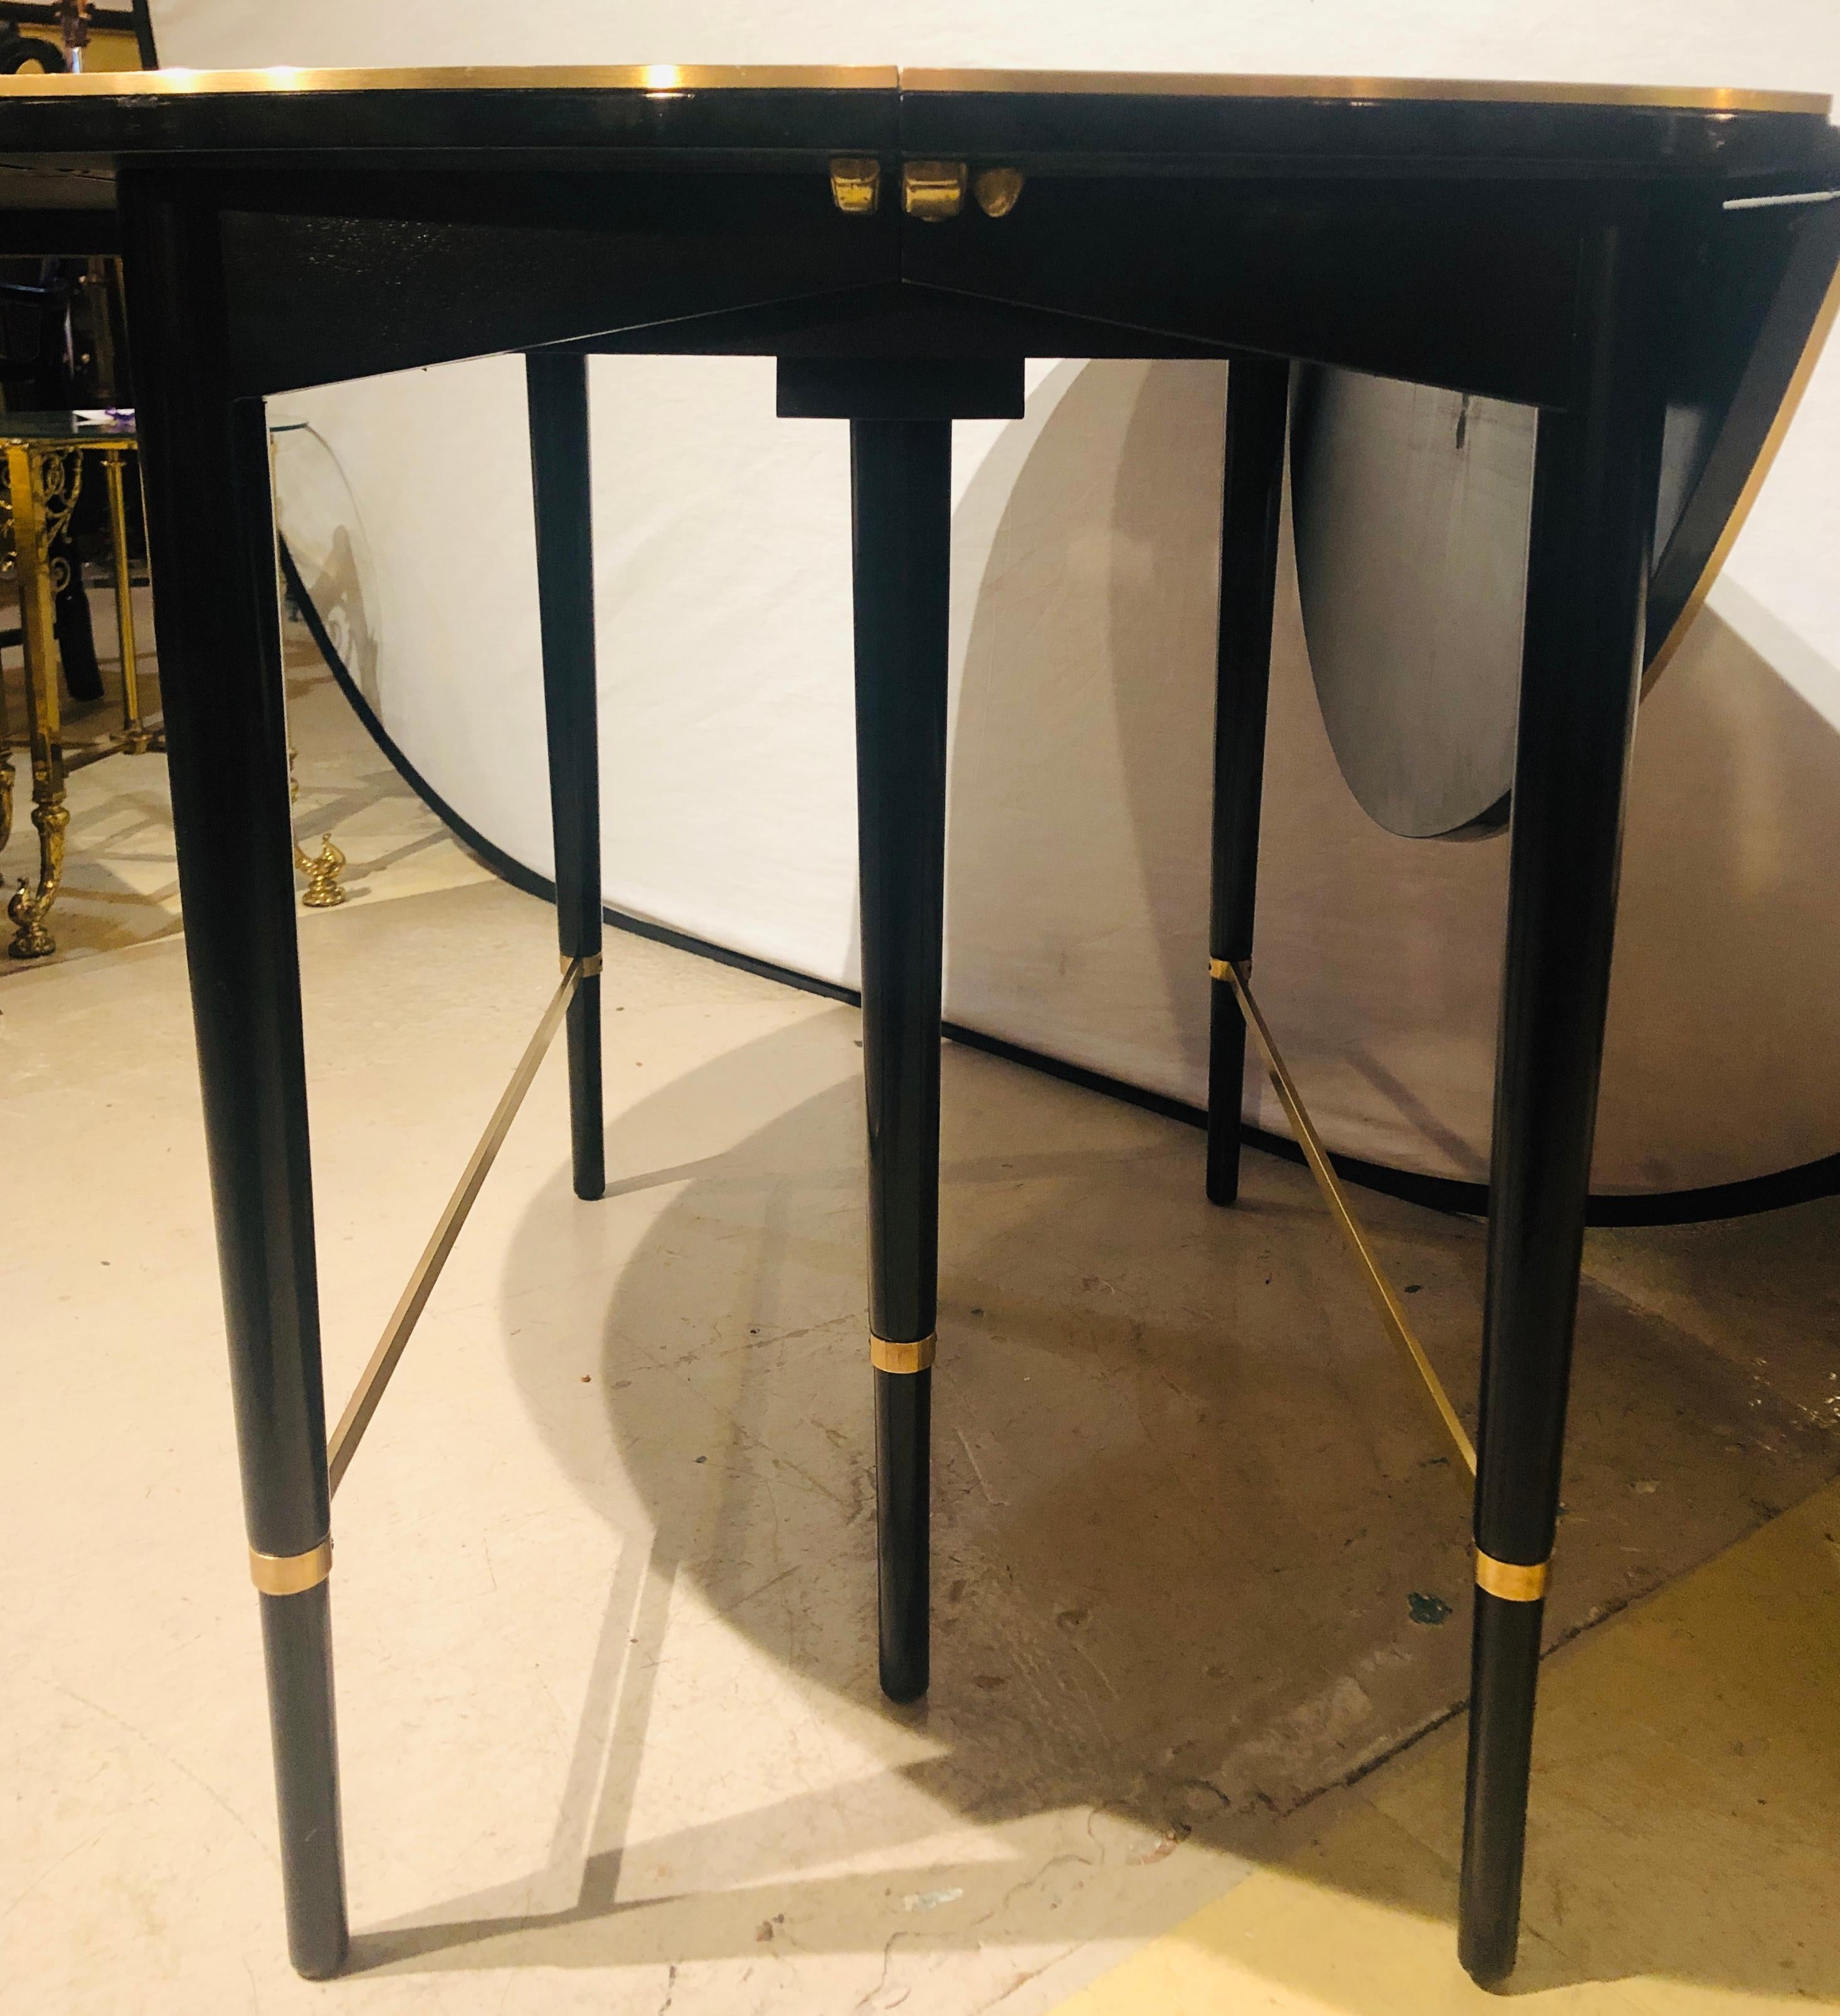 Mid-Century Modern Black Lacquered Paul McCobb Serving / Dining Table 5 Leaves (amerikanisch)